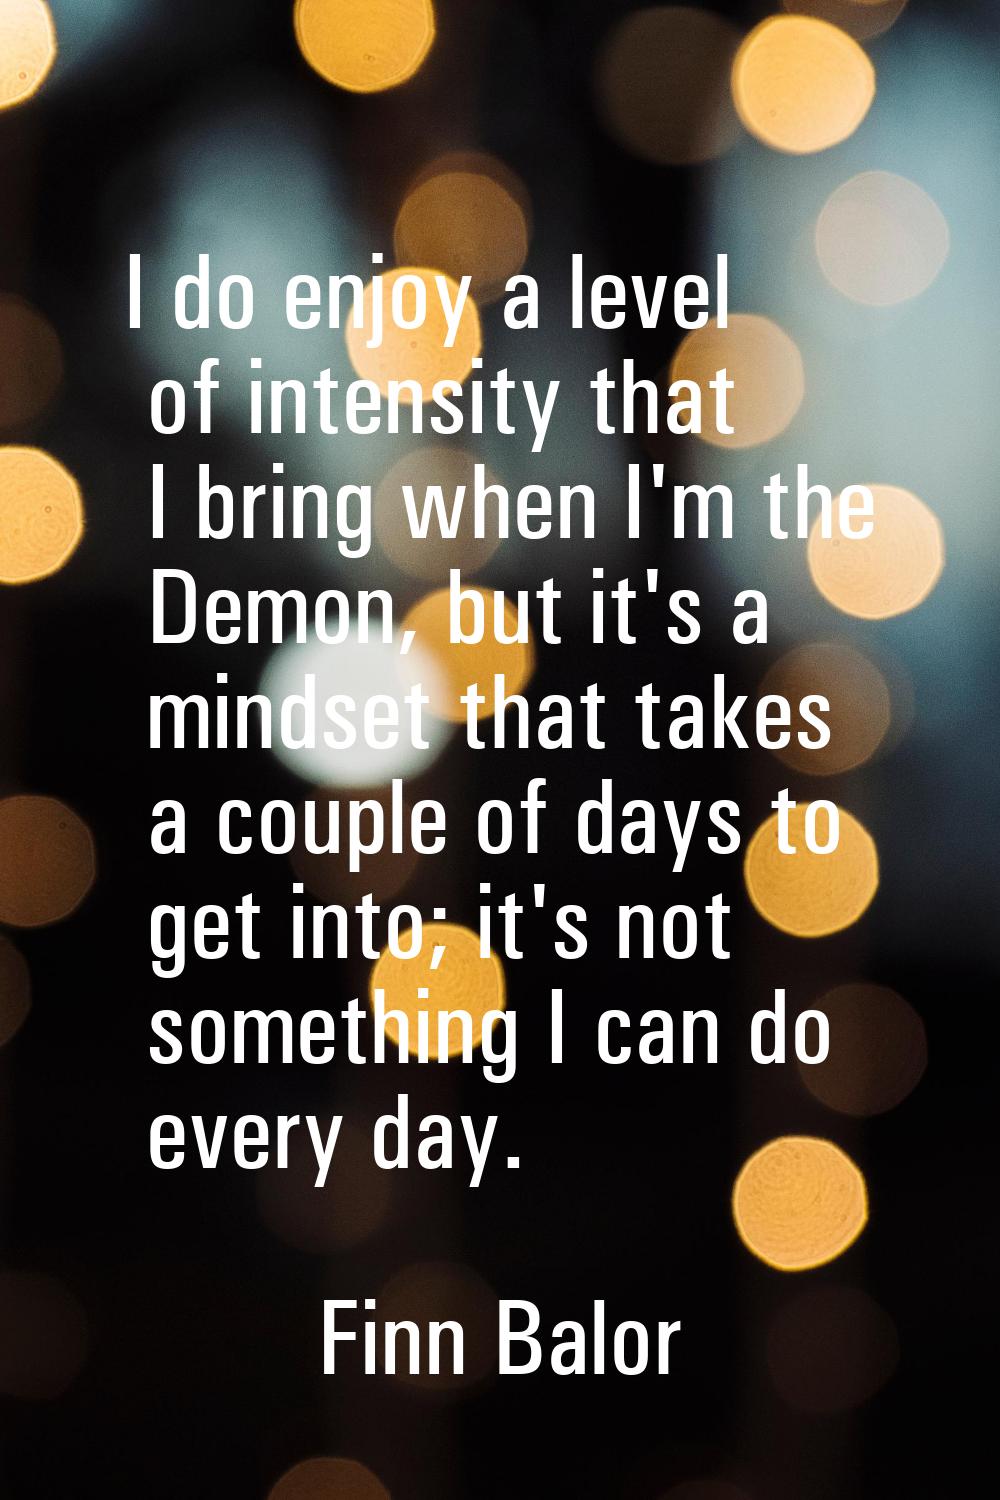 I do enjoy a level of intensity that I bring when I'm the Demon, but it's a mindset that takes a co